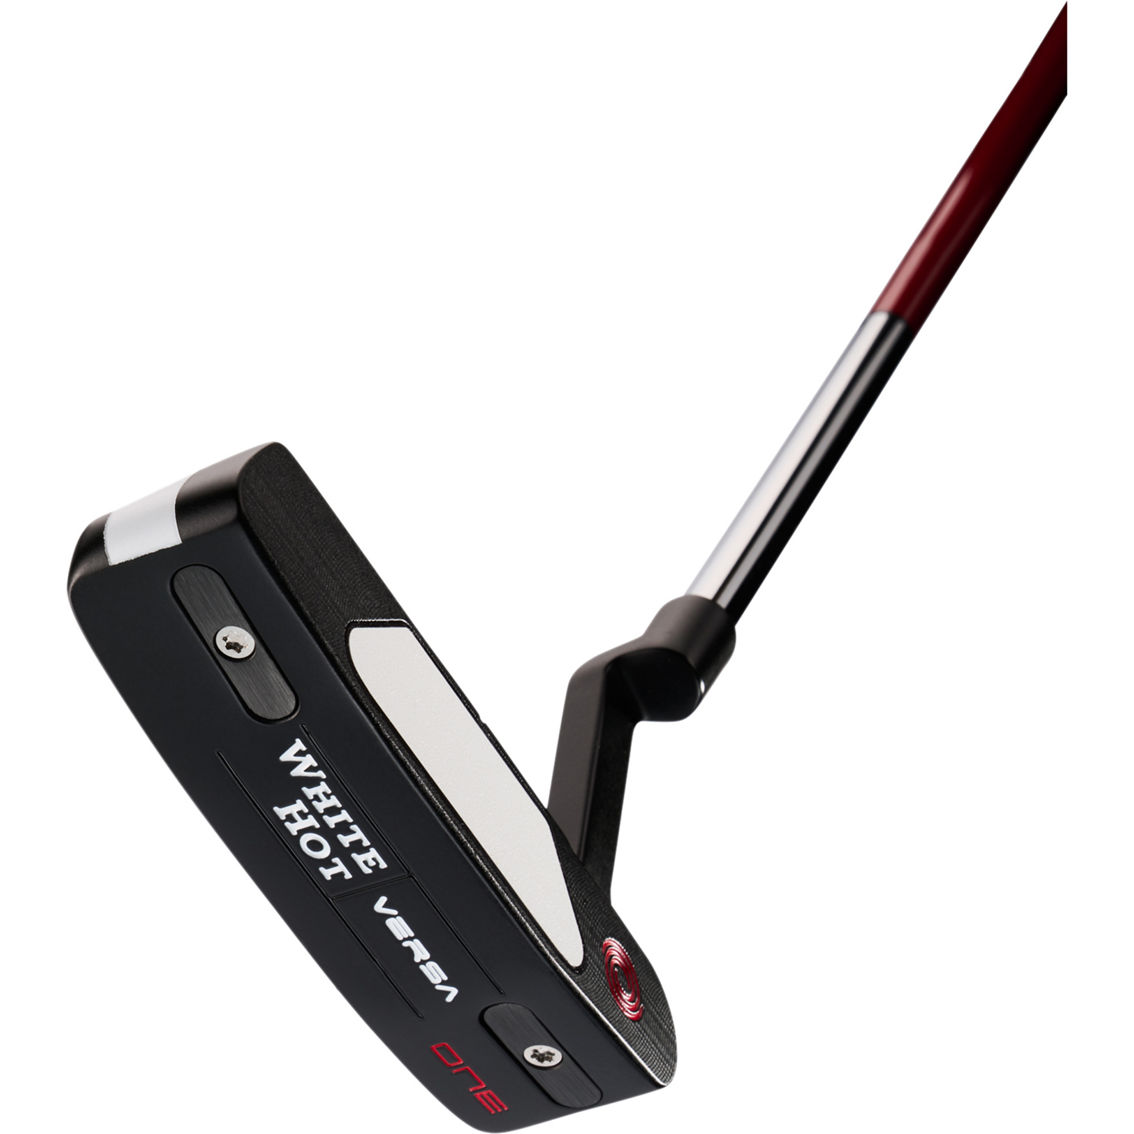 Callaway Adult Right Hand Odyssey White Hot Versa One CH 35 in. Putter - Image 4 of 4